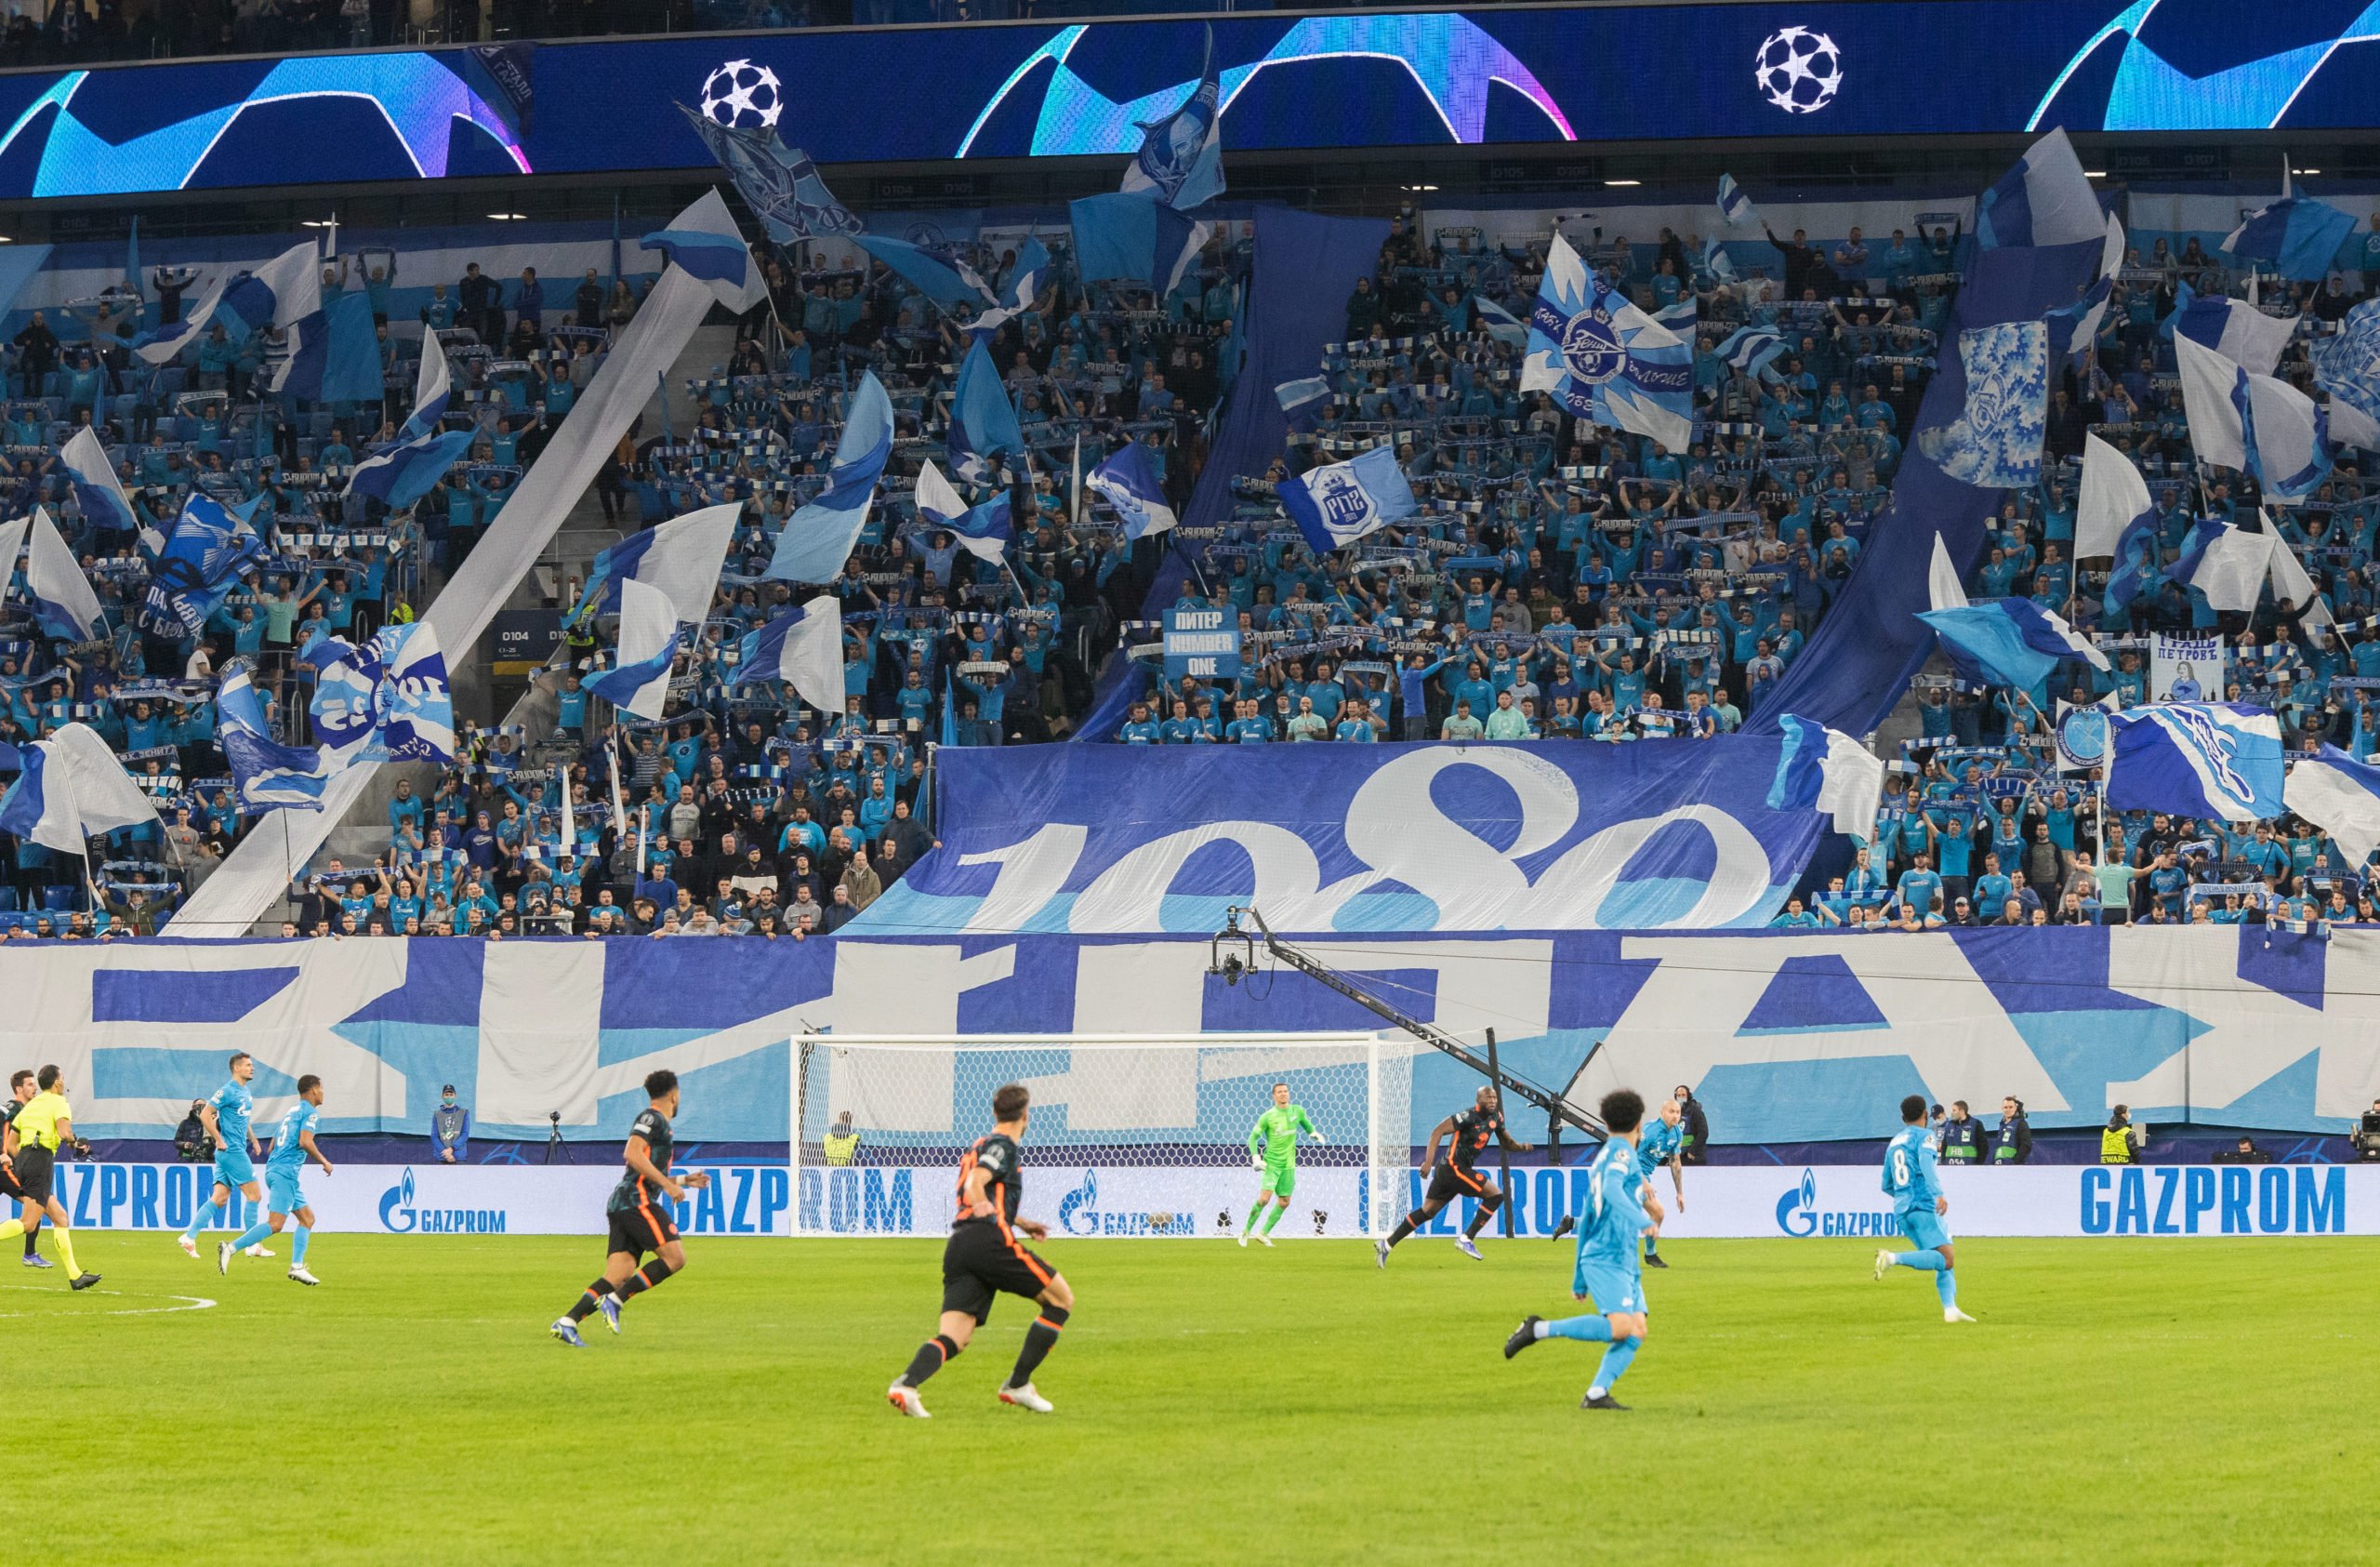 'Changed the game': Some Chelsea fans absolutely loved their substitute's cameo display in 3-3 Zenit draw